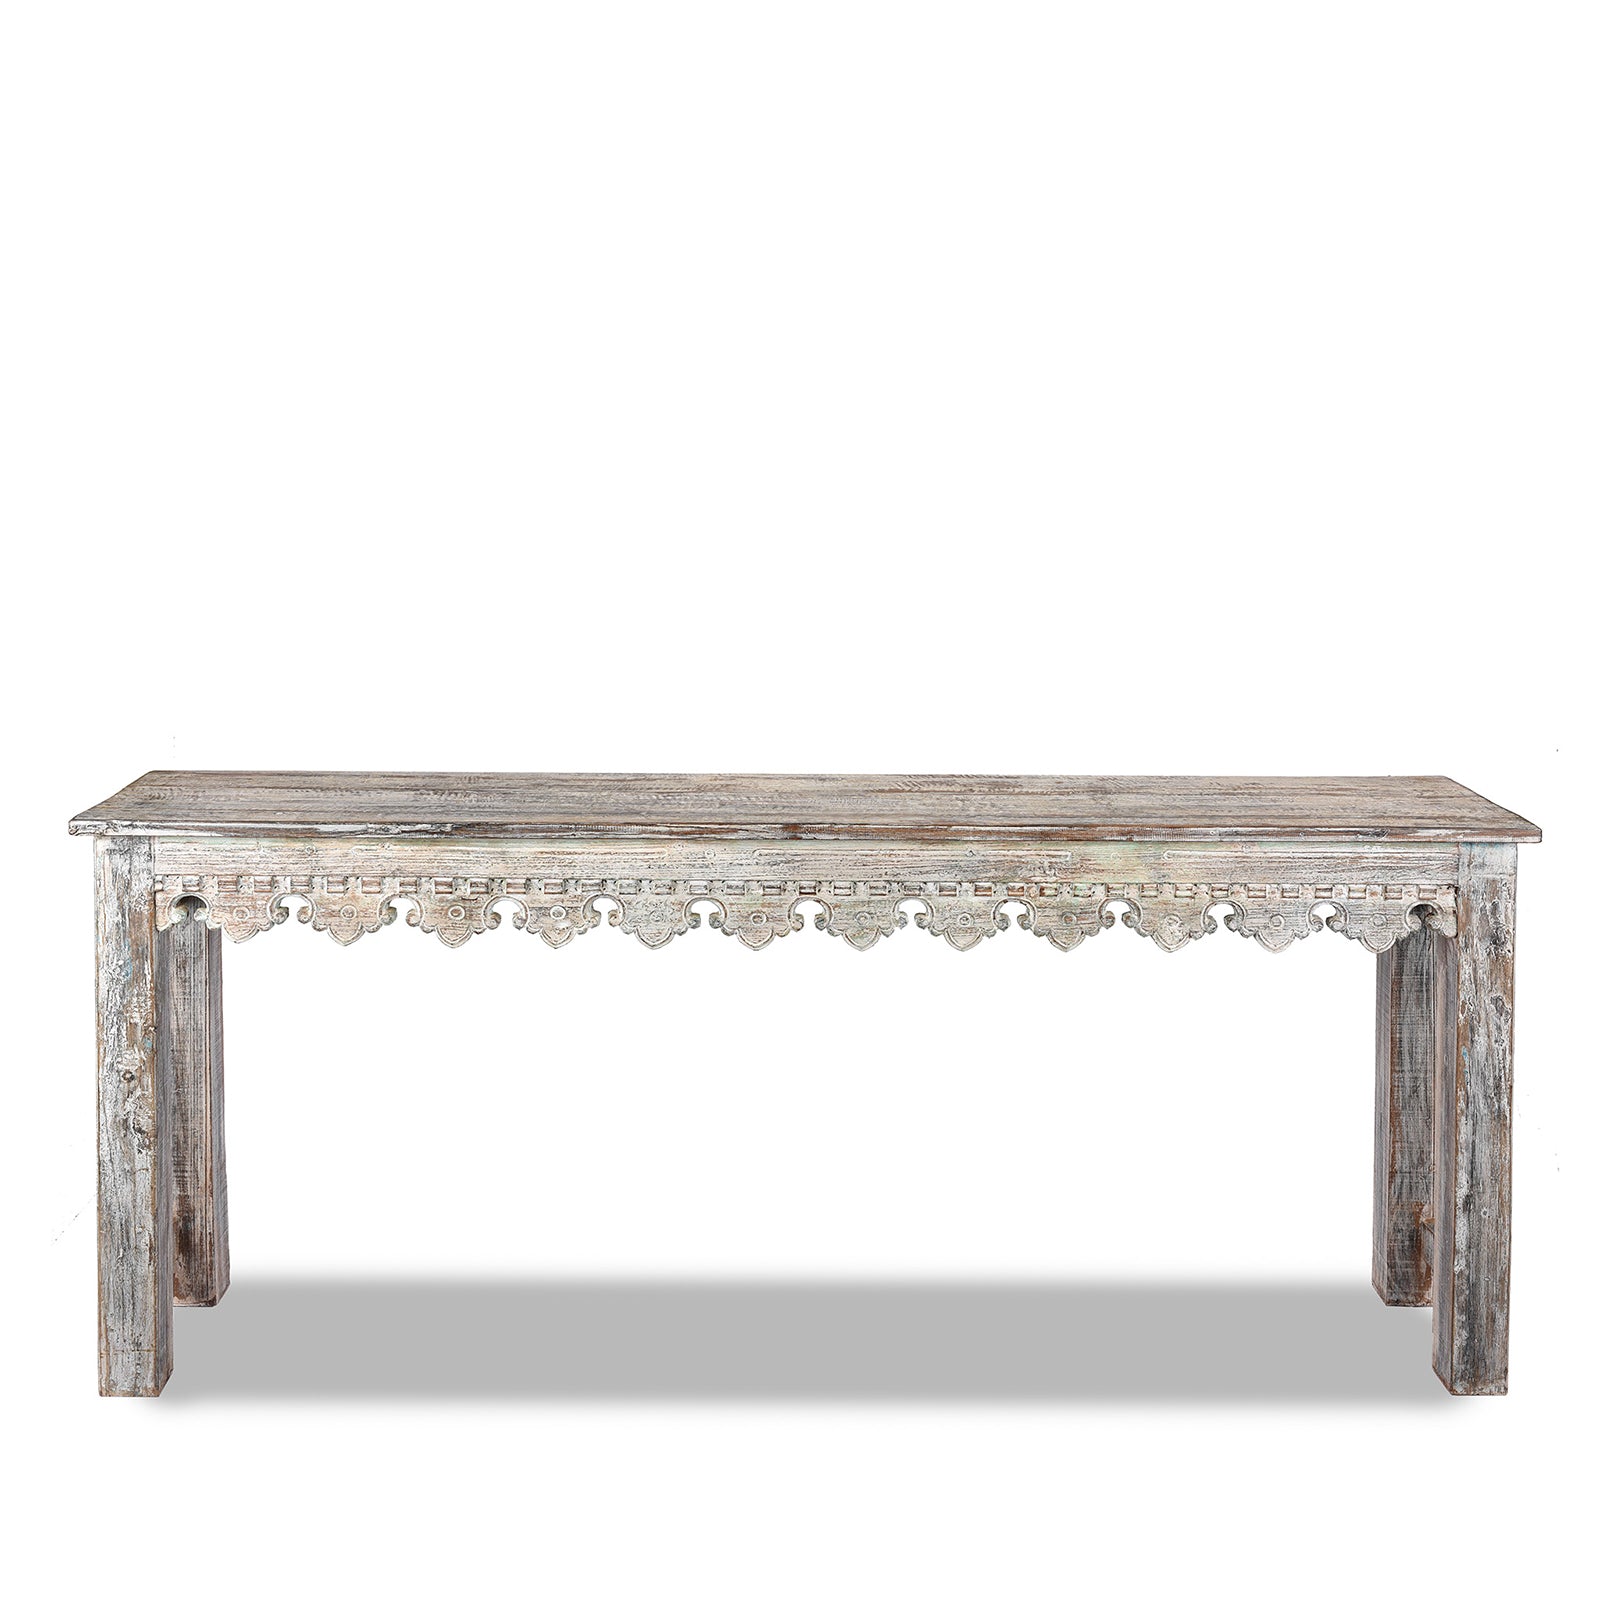 Reclaimed Teakwood Console Table With Painted Finish | Indigo Antiques